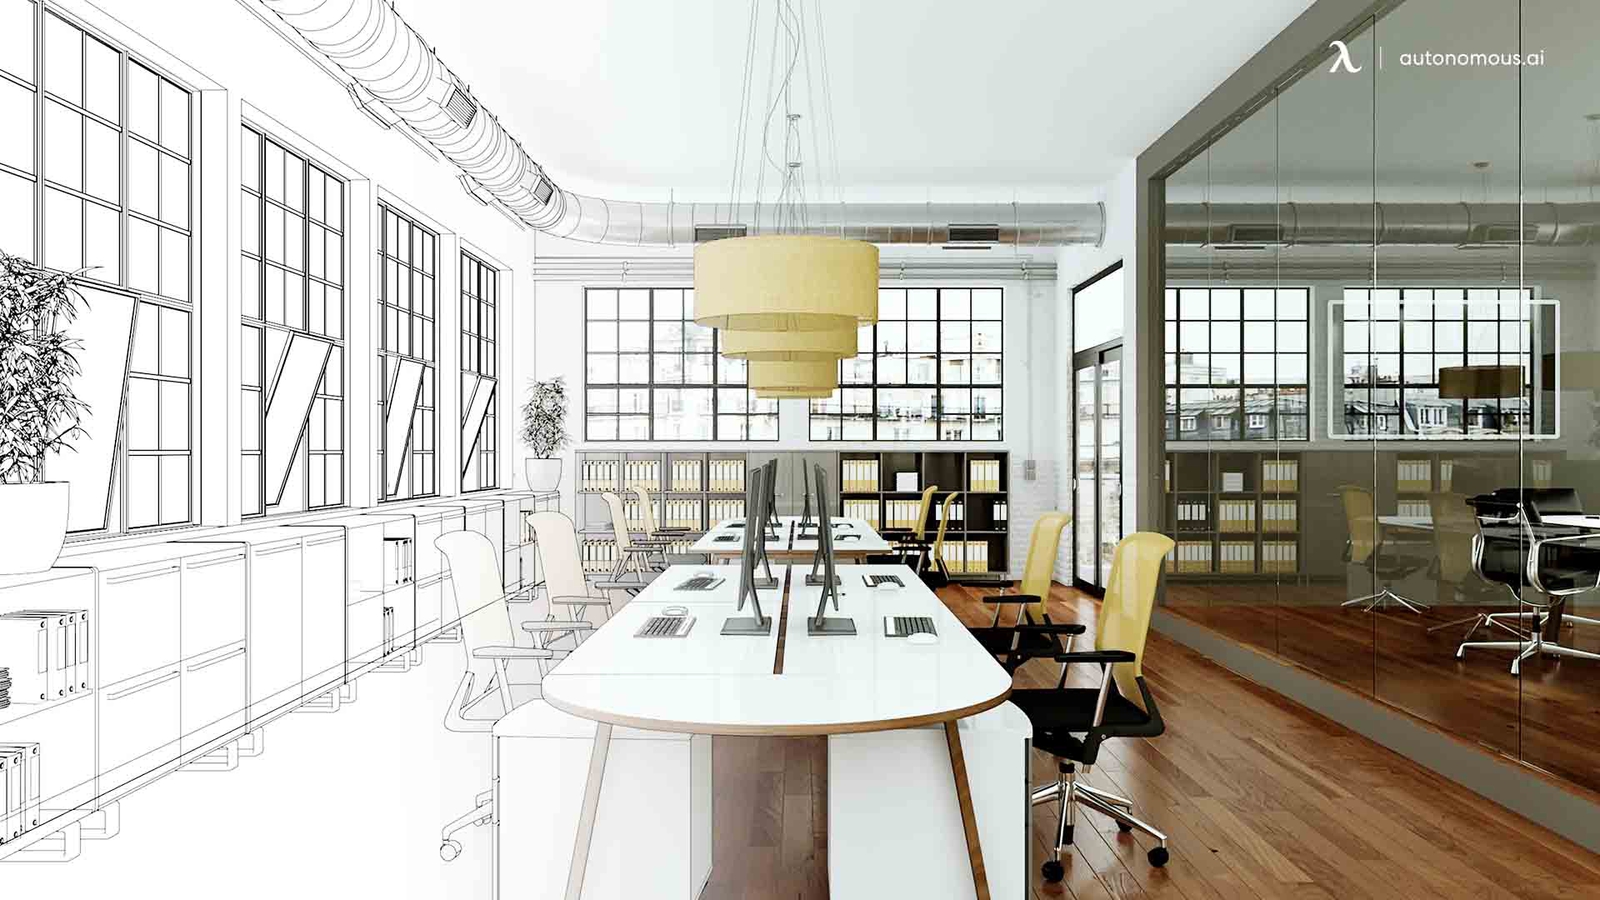 How to Design an Ergonomic Office Layout? A Full Guide